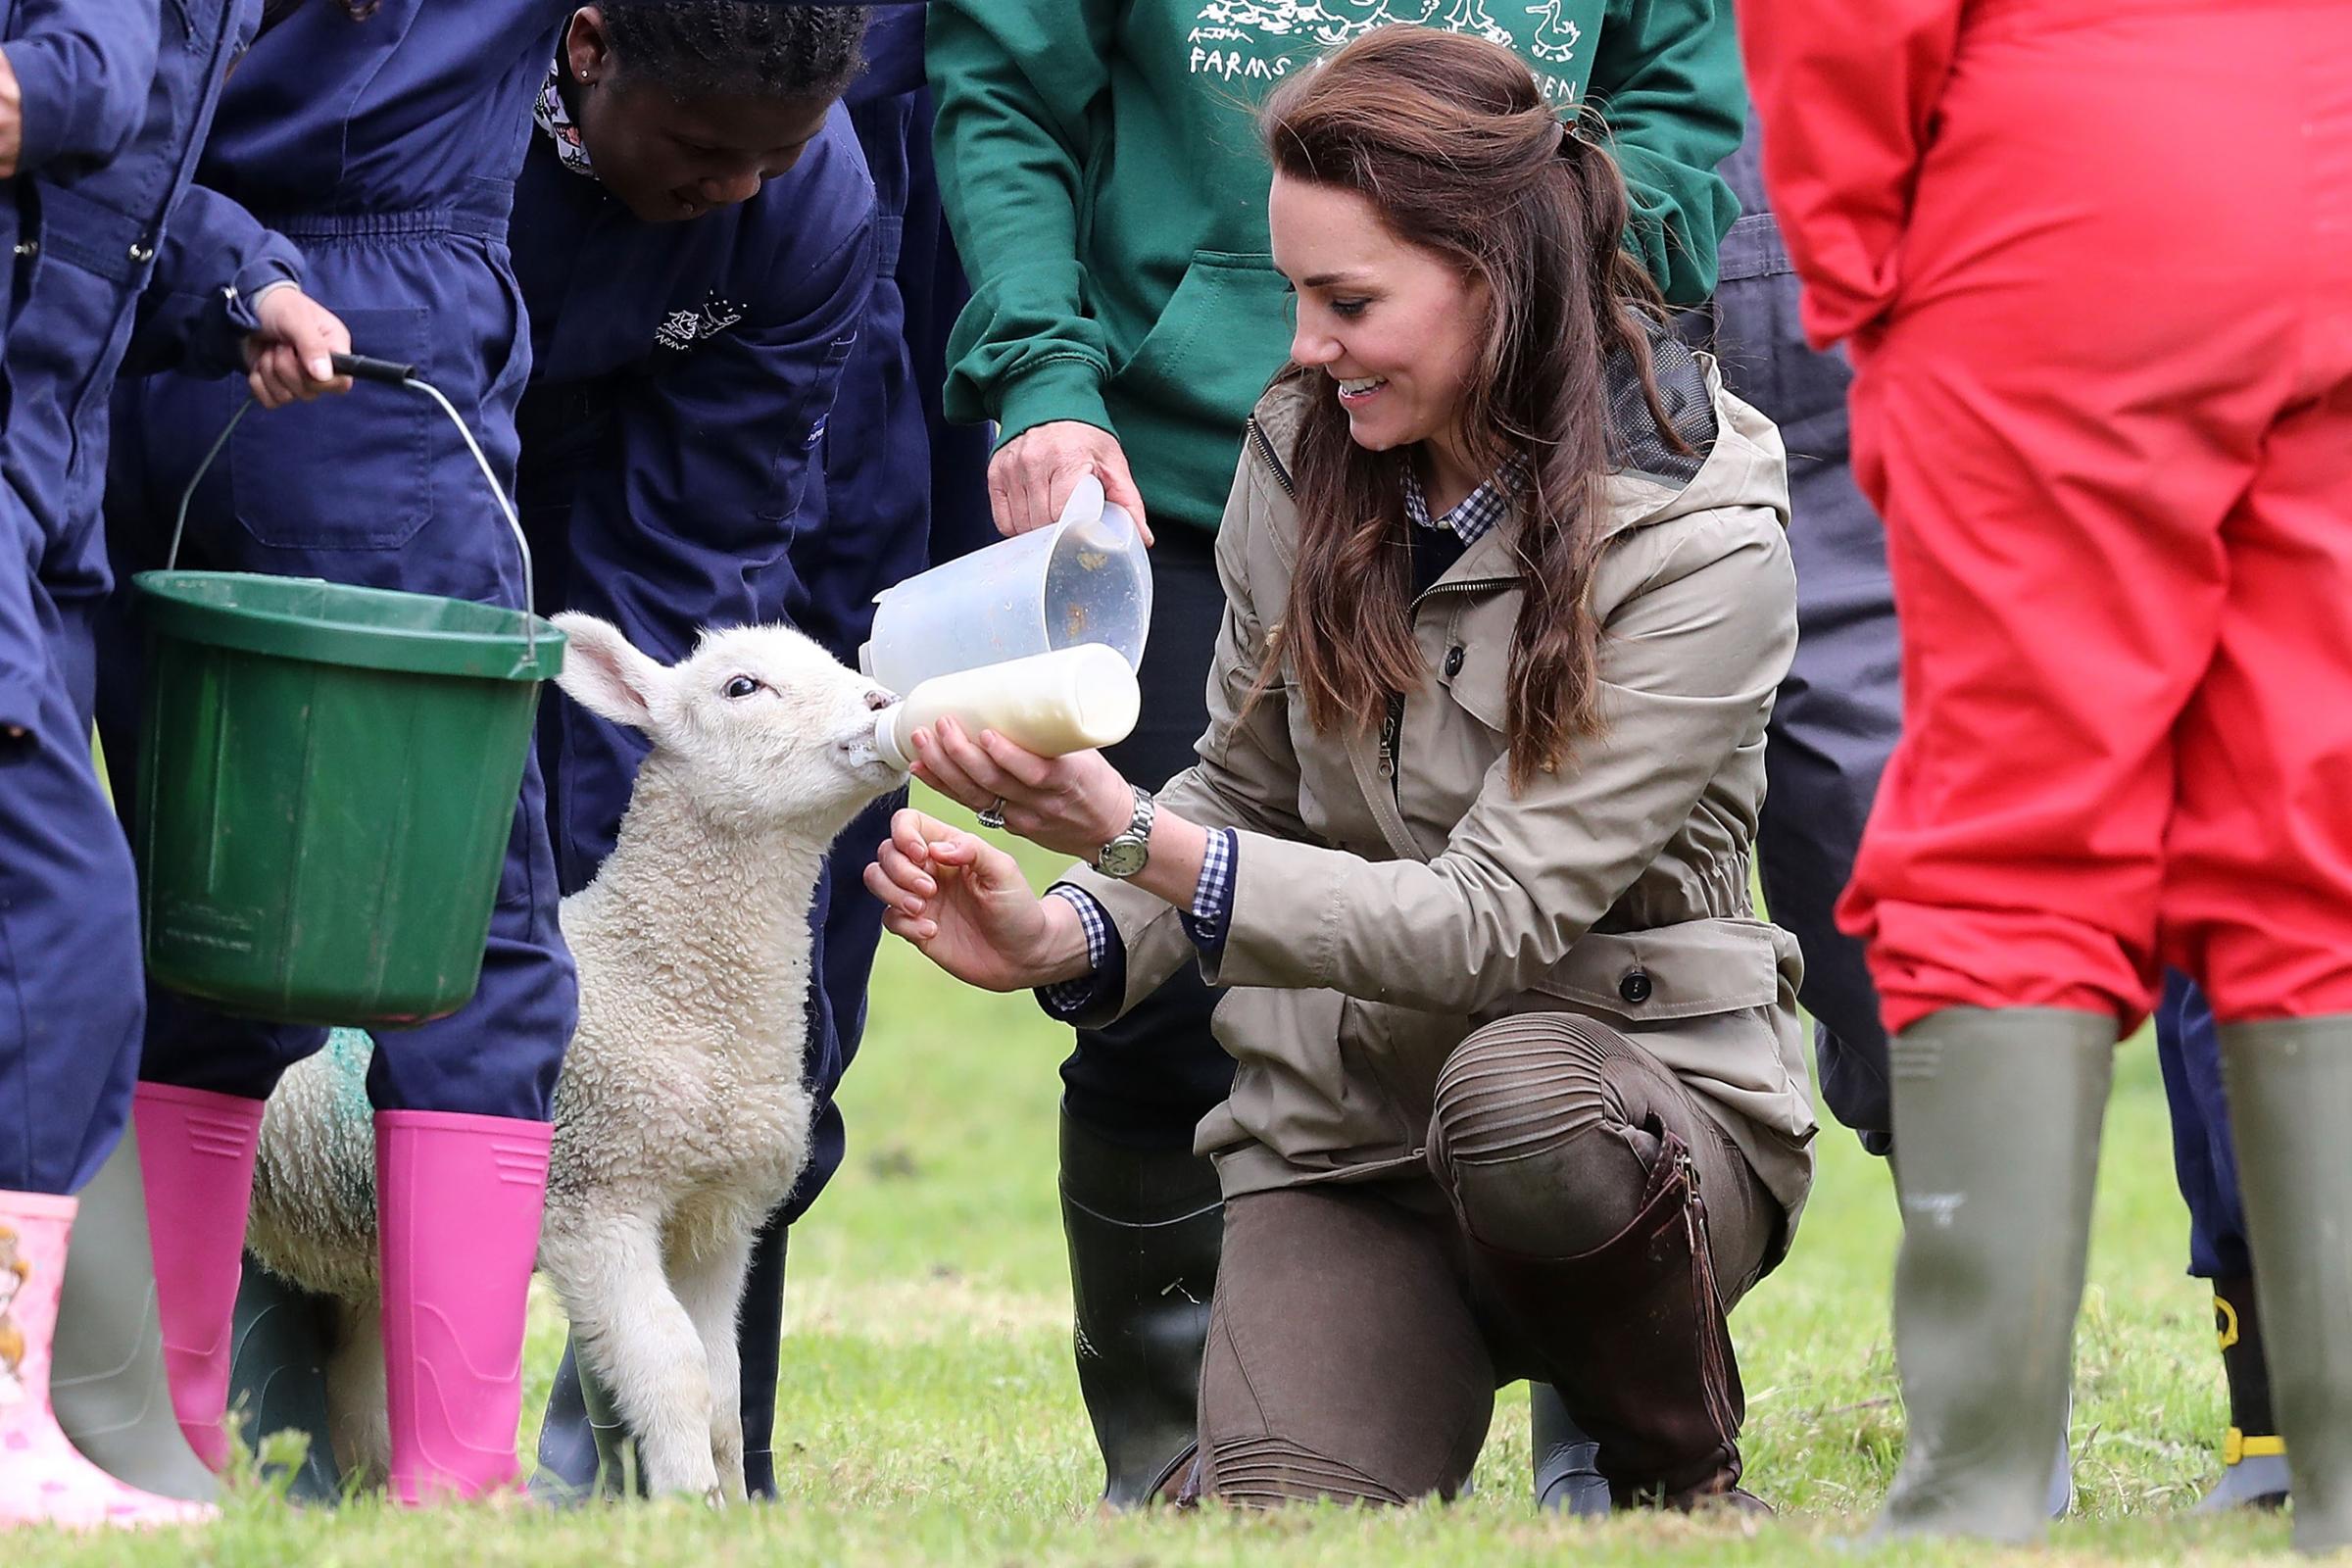 Catherine, Duchess of Cambridge feeds "Stinky" the lamb during a visit to Author Michael Morpurgo's Farms for City Children in Arlingham, Gloucestershire, on May 3, 2017.